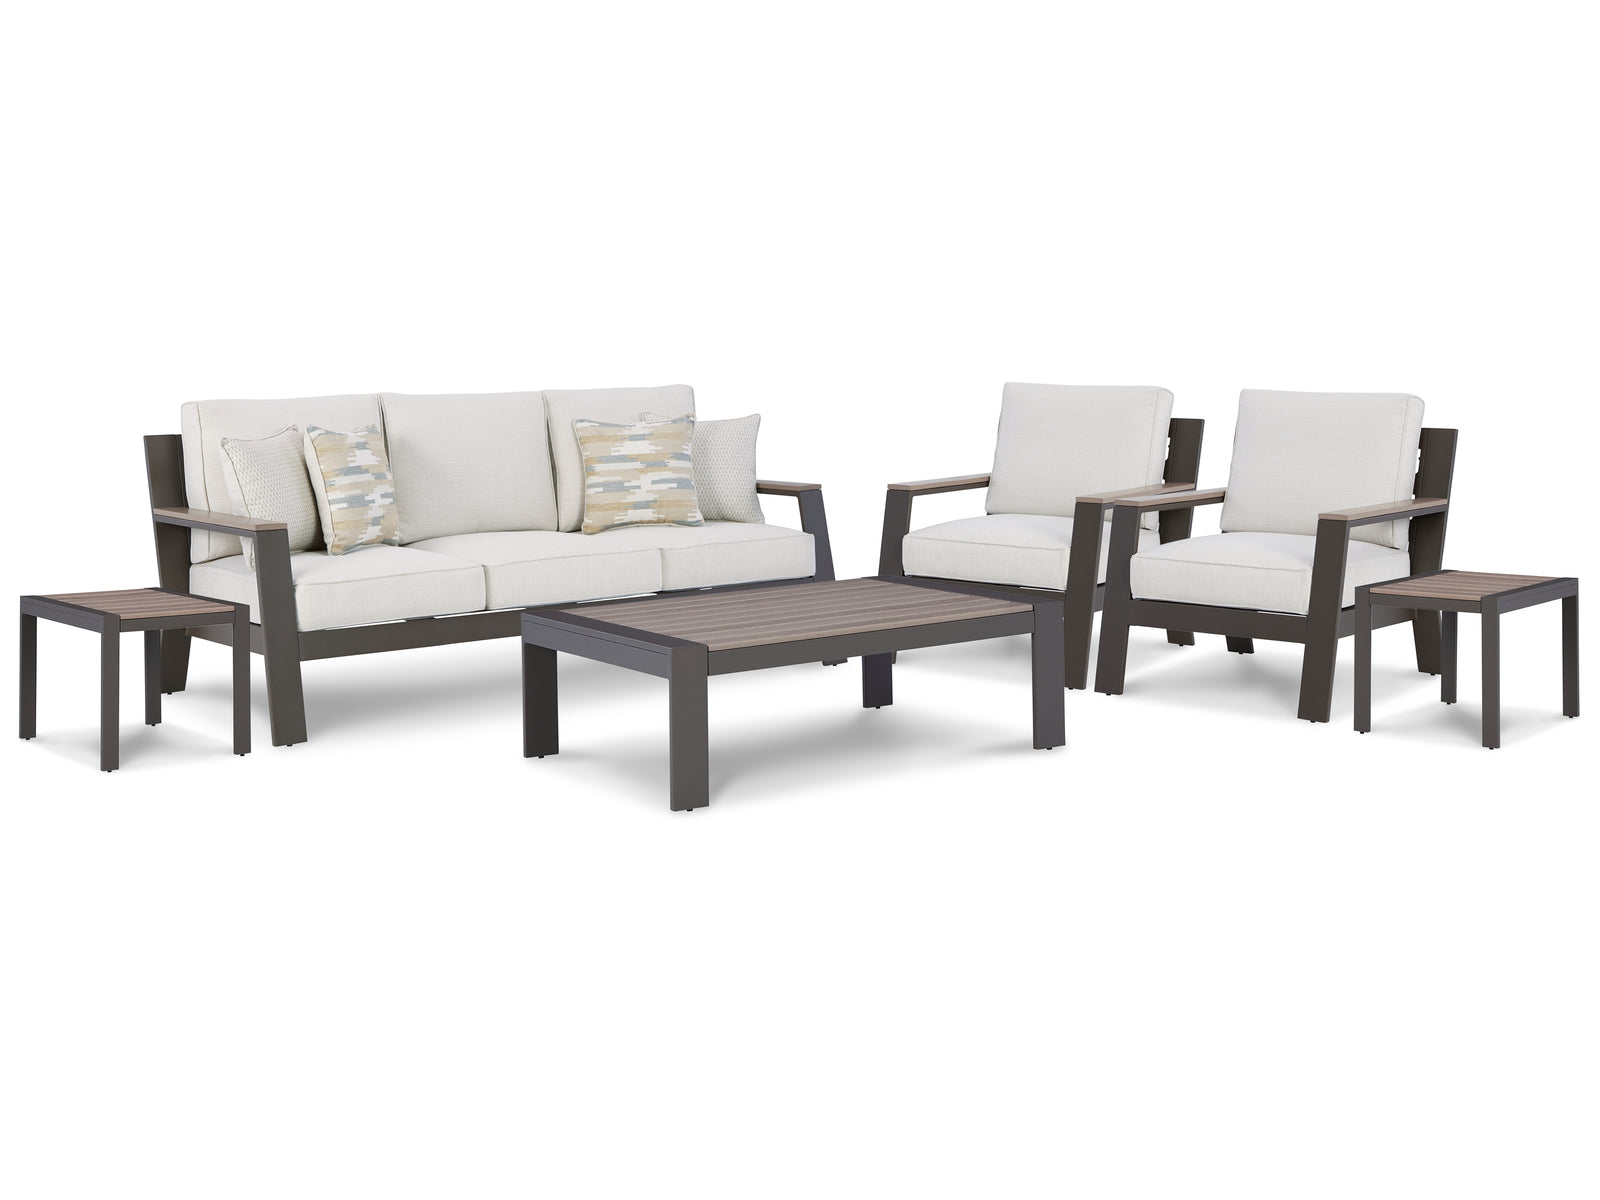 Tropicava Taupe/white Outdoor Sofa And  2 Lounge Chairs With Coffee Table And 2 End Tables